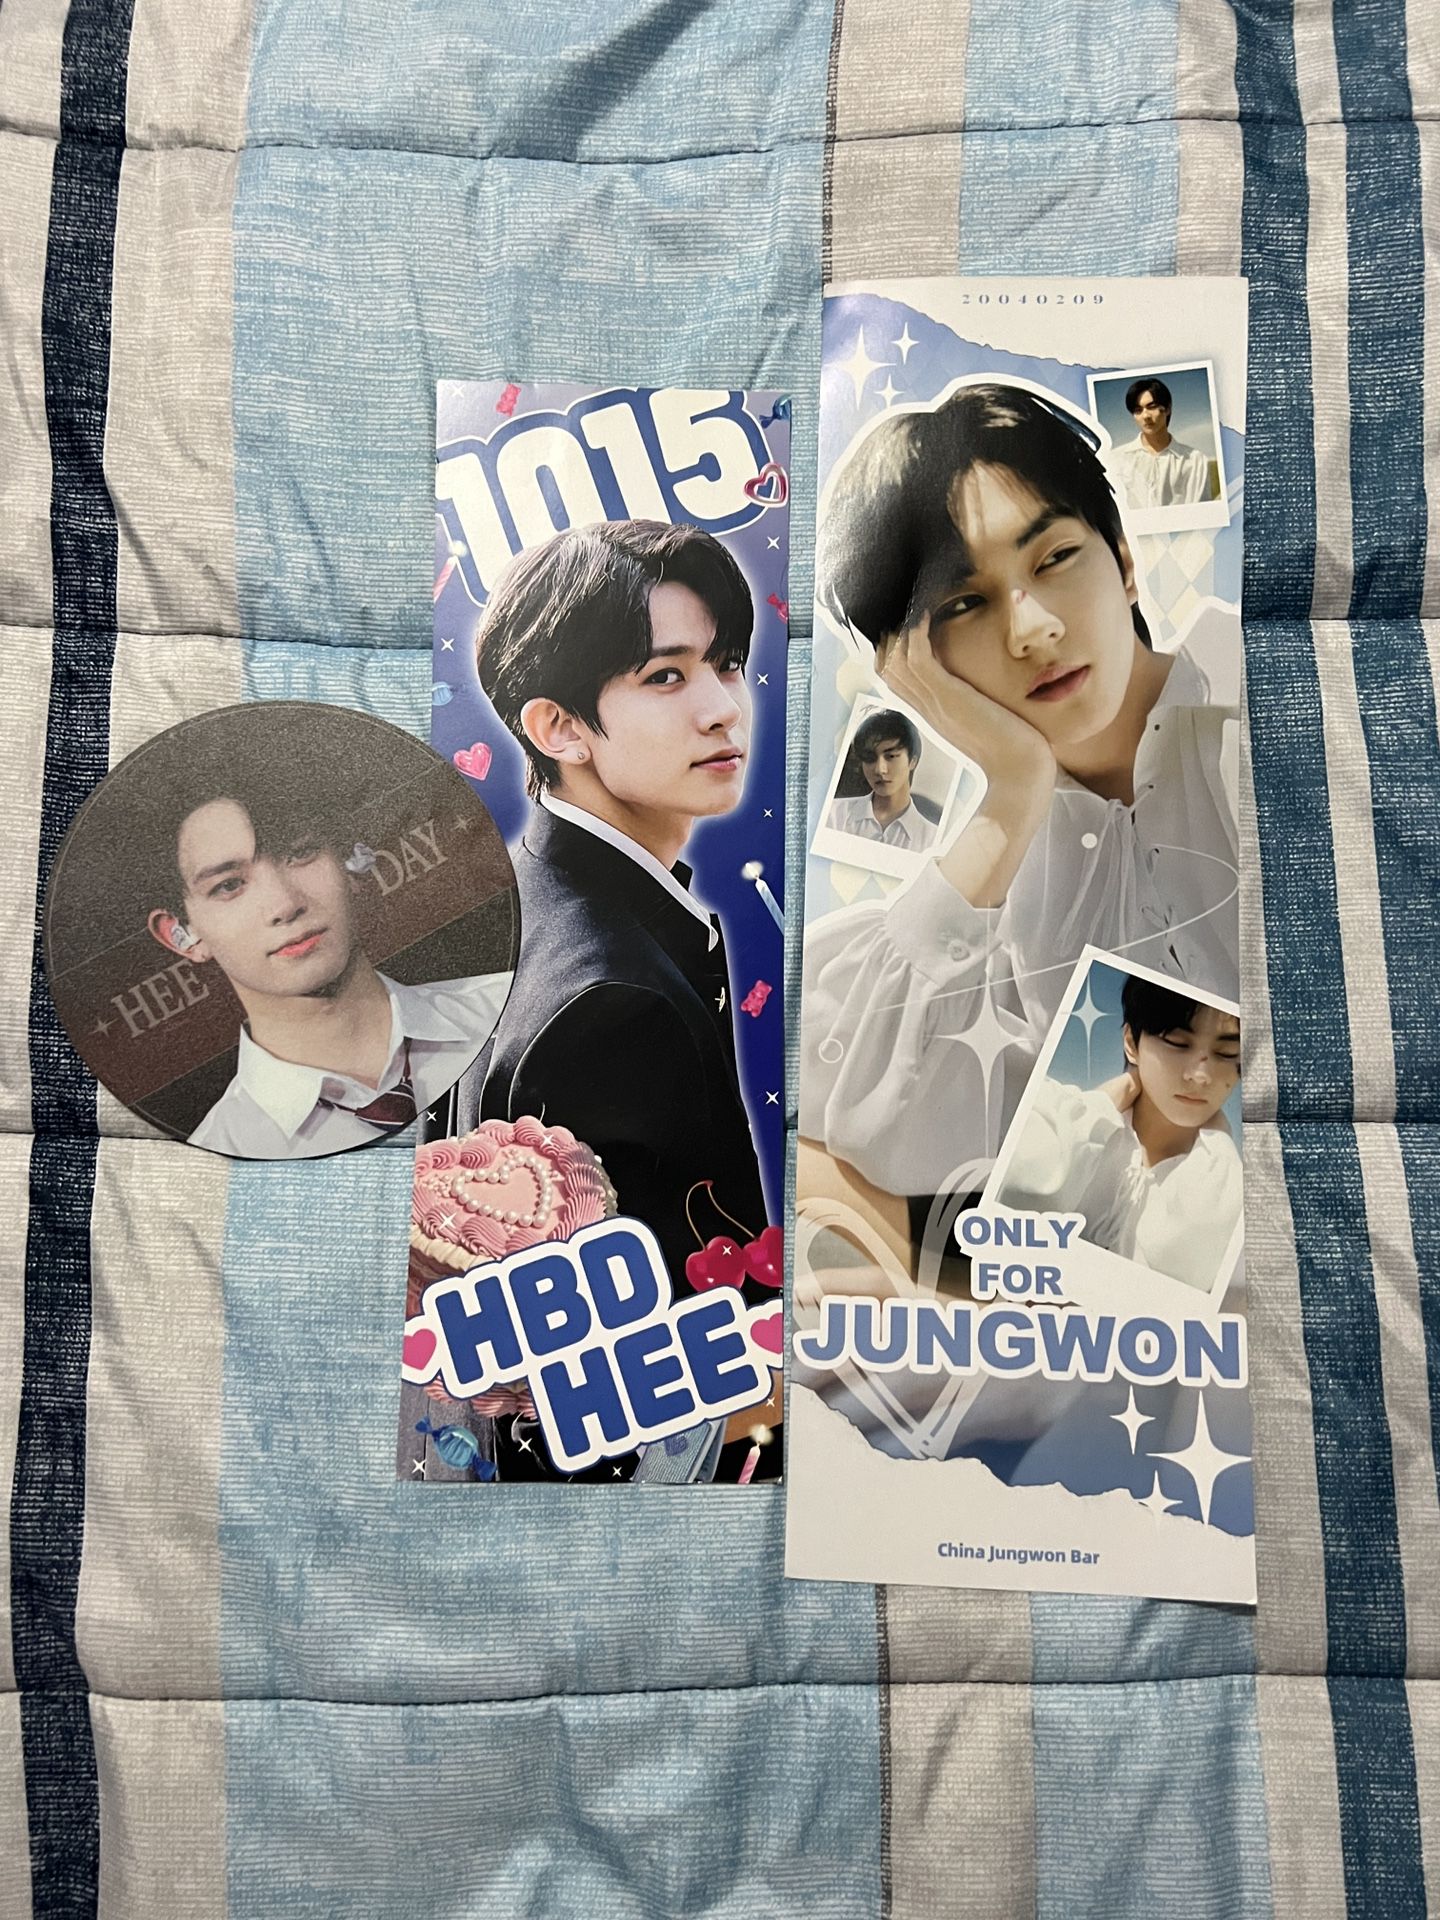 Heeseung's Birthday and Jungwon's slogan Banner